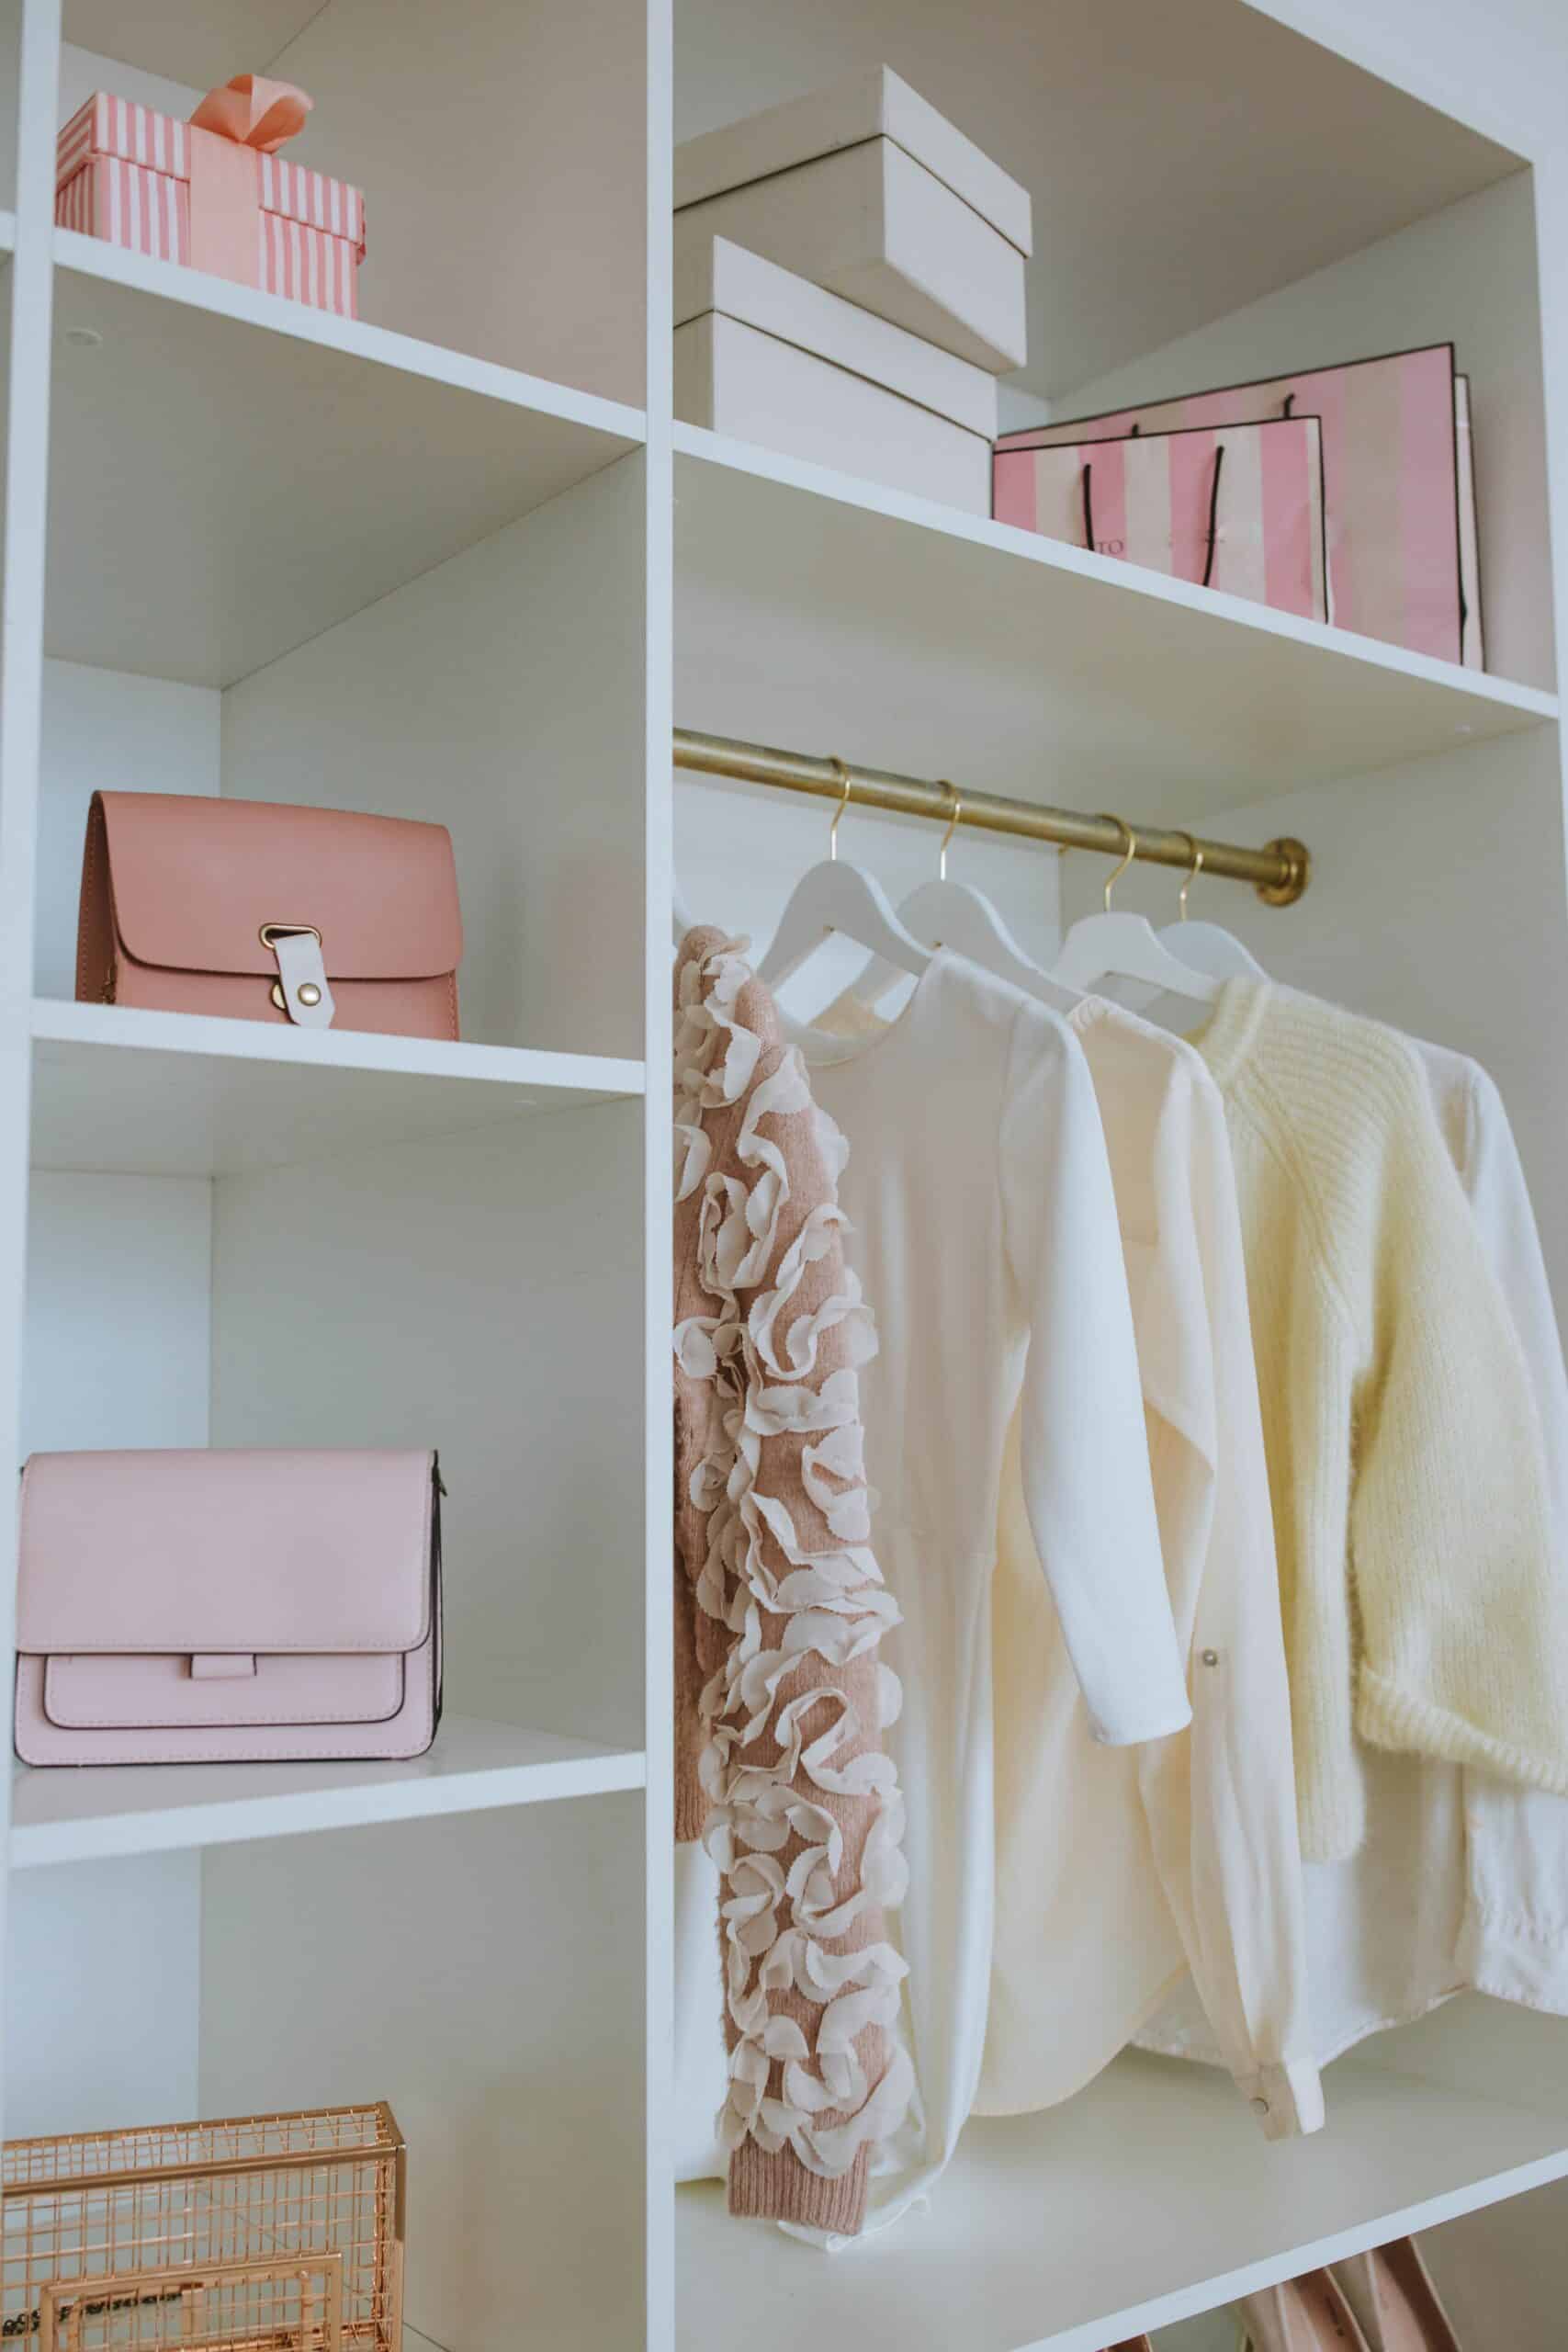 Why You Should use a Professional Organizer